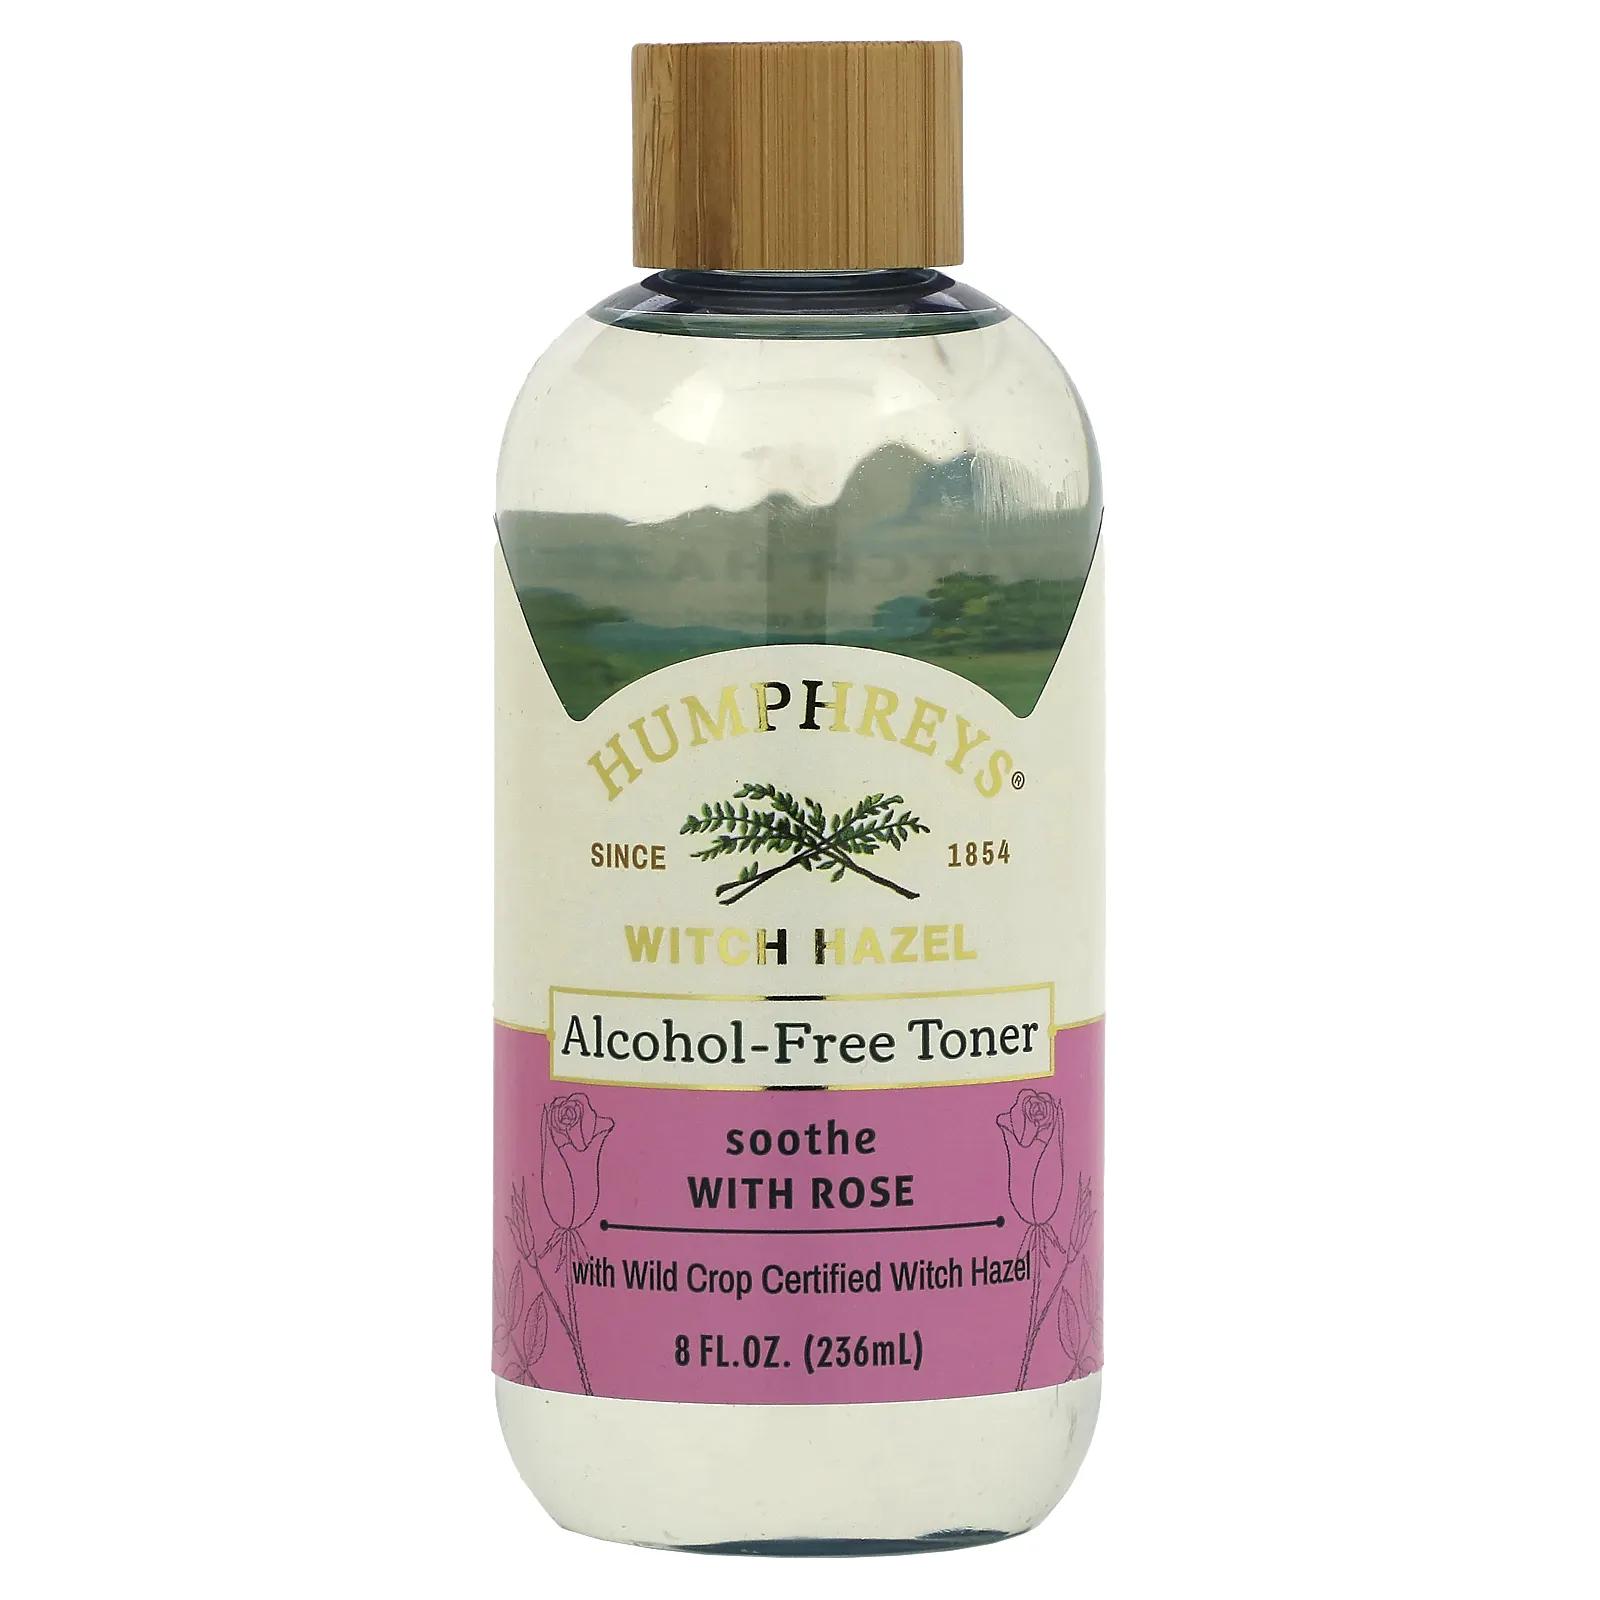 Humphrey's Witch Hazel Alcohol Free Toner with Rose Soothe 8 fl oz (236 ml)